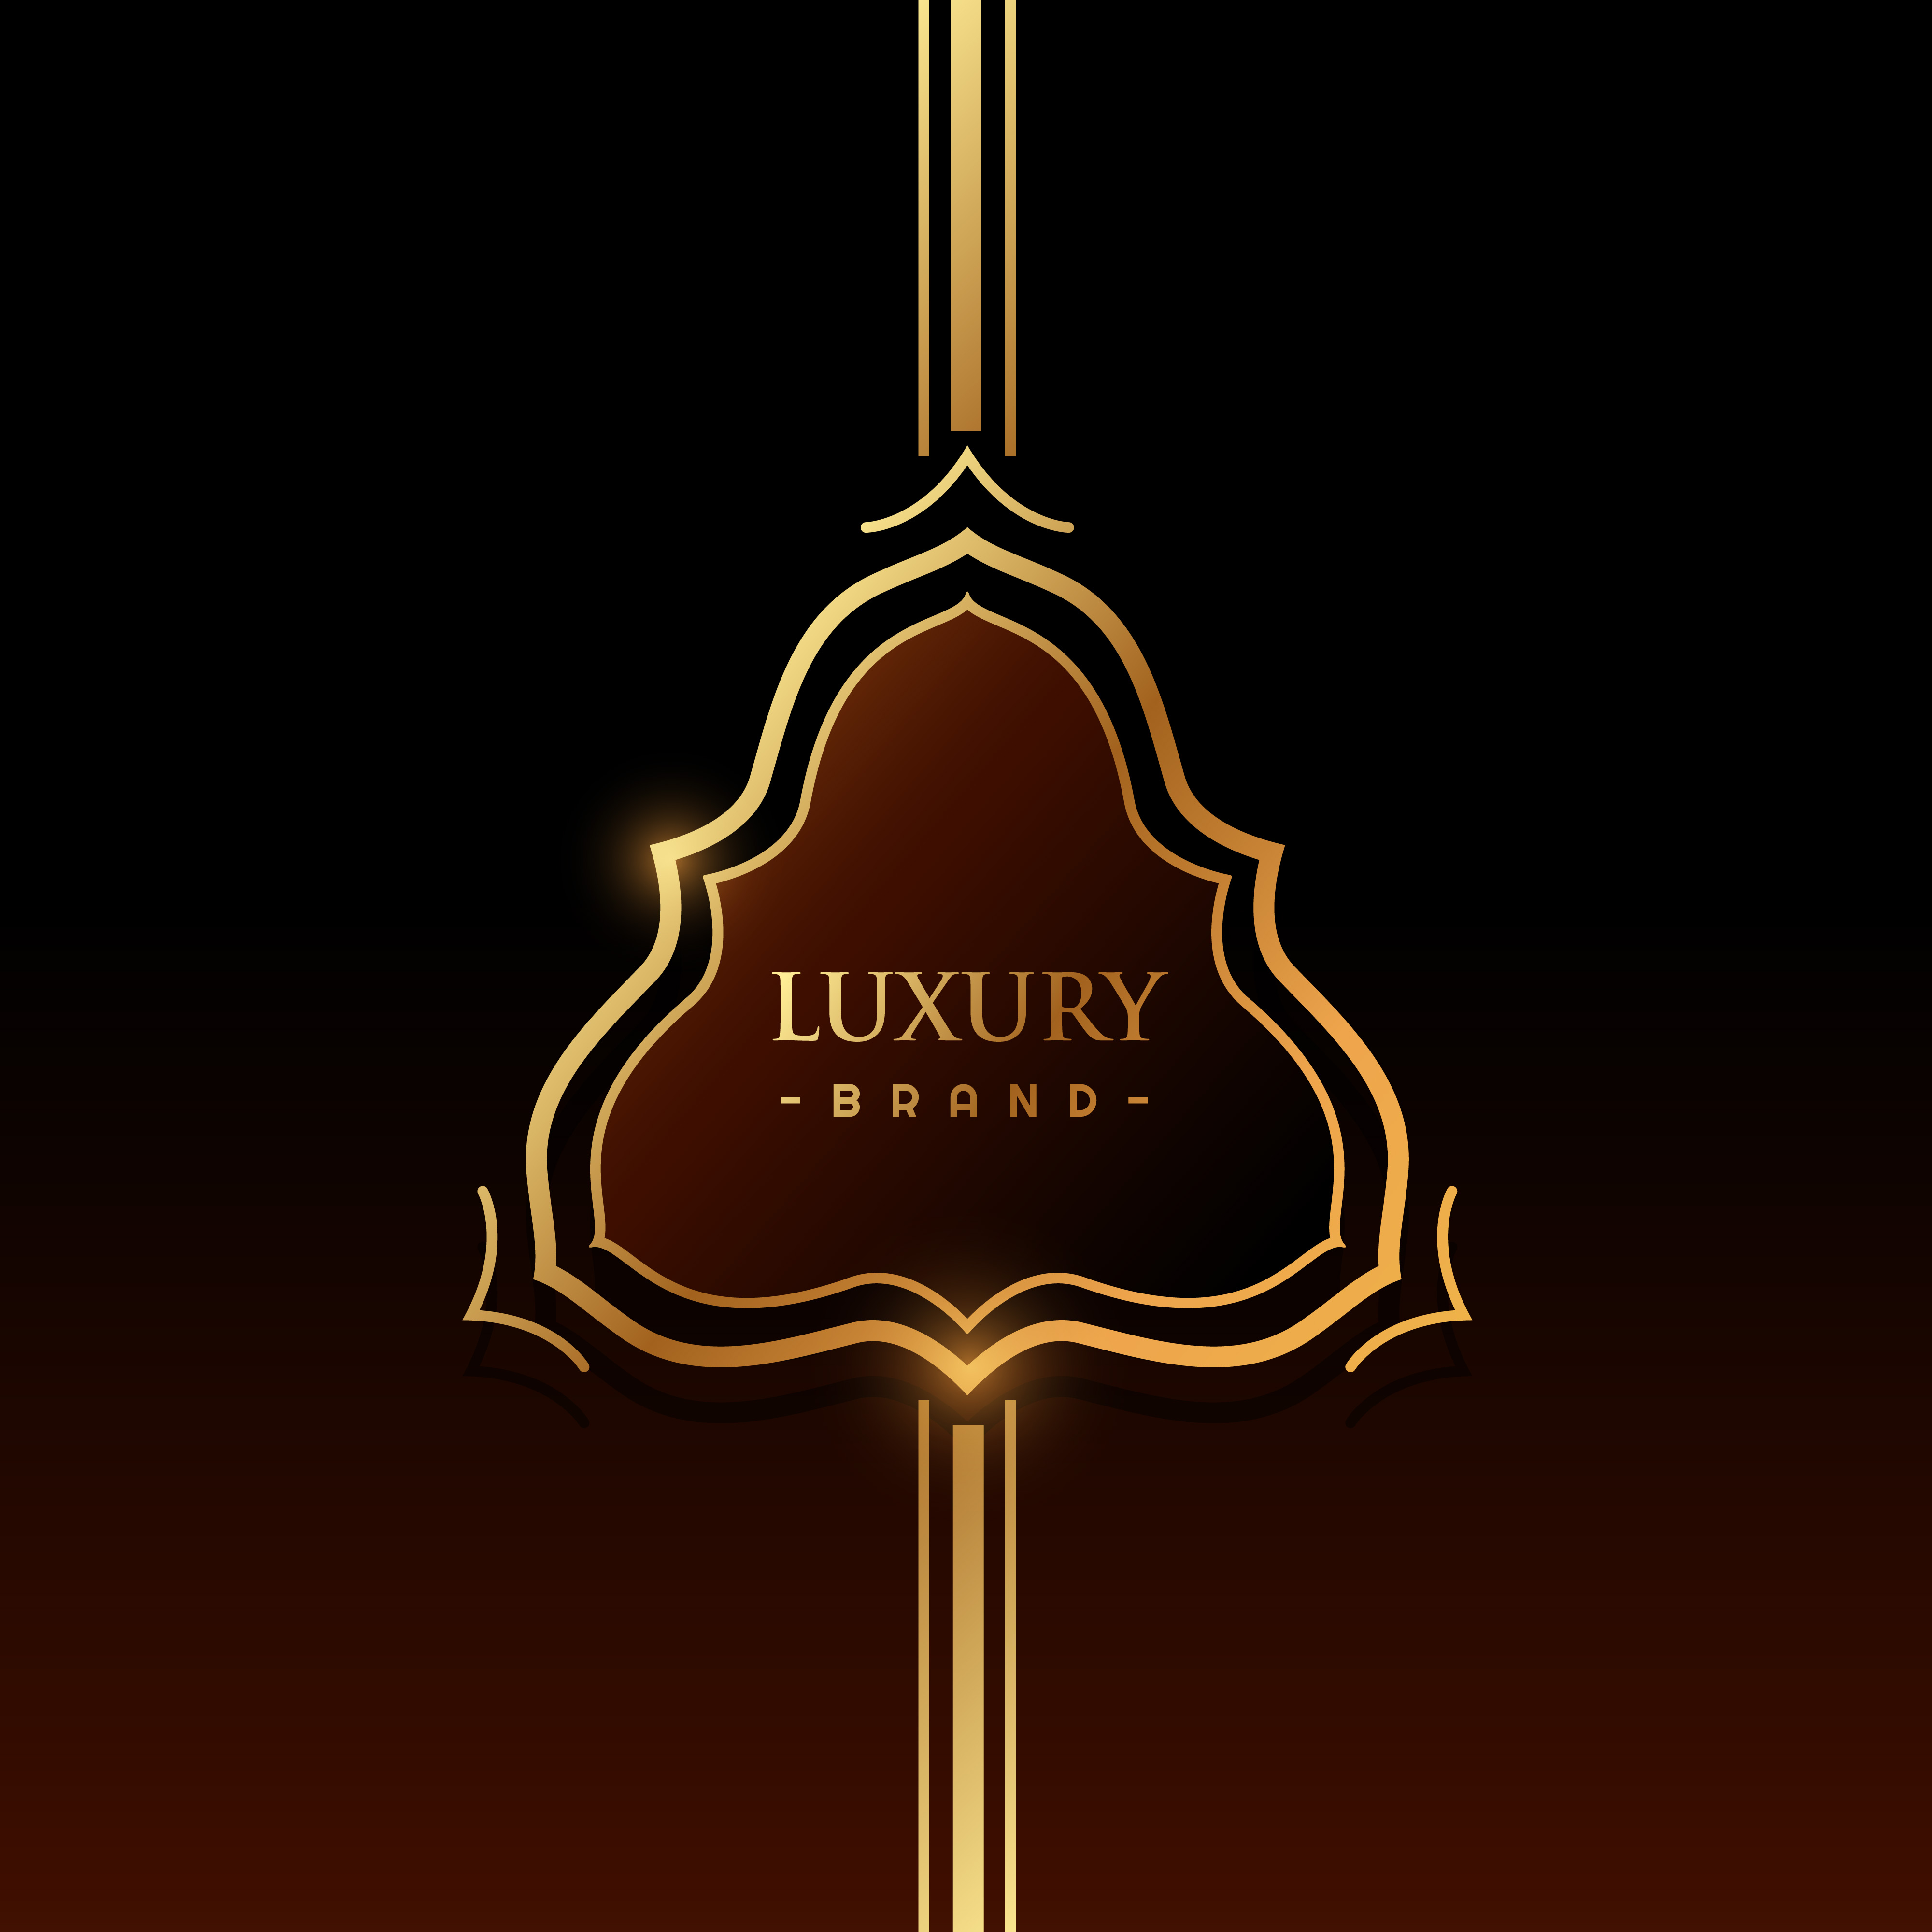 luxury brand label - Download Free Vector Art, Stock Graphics & Images